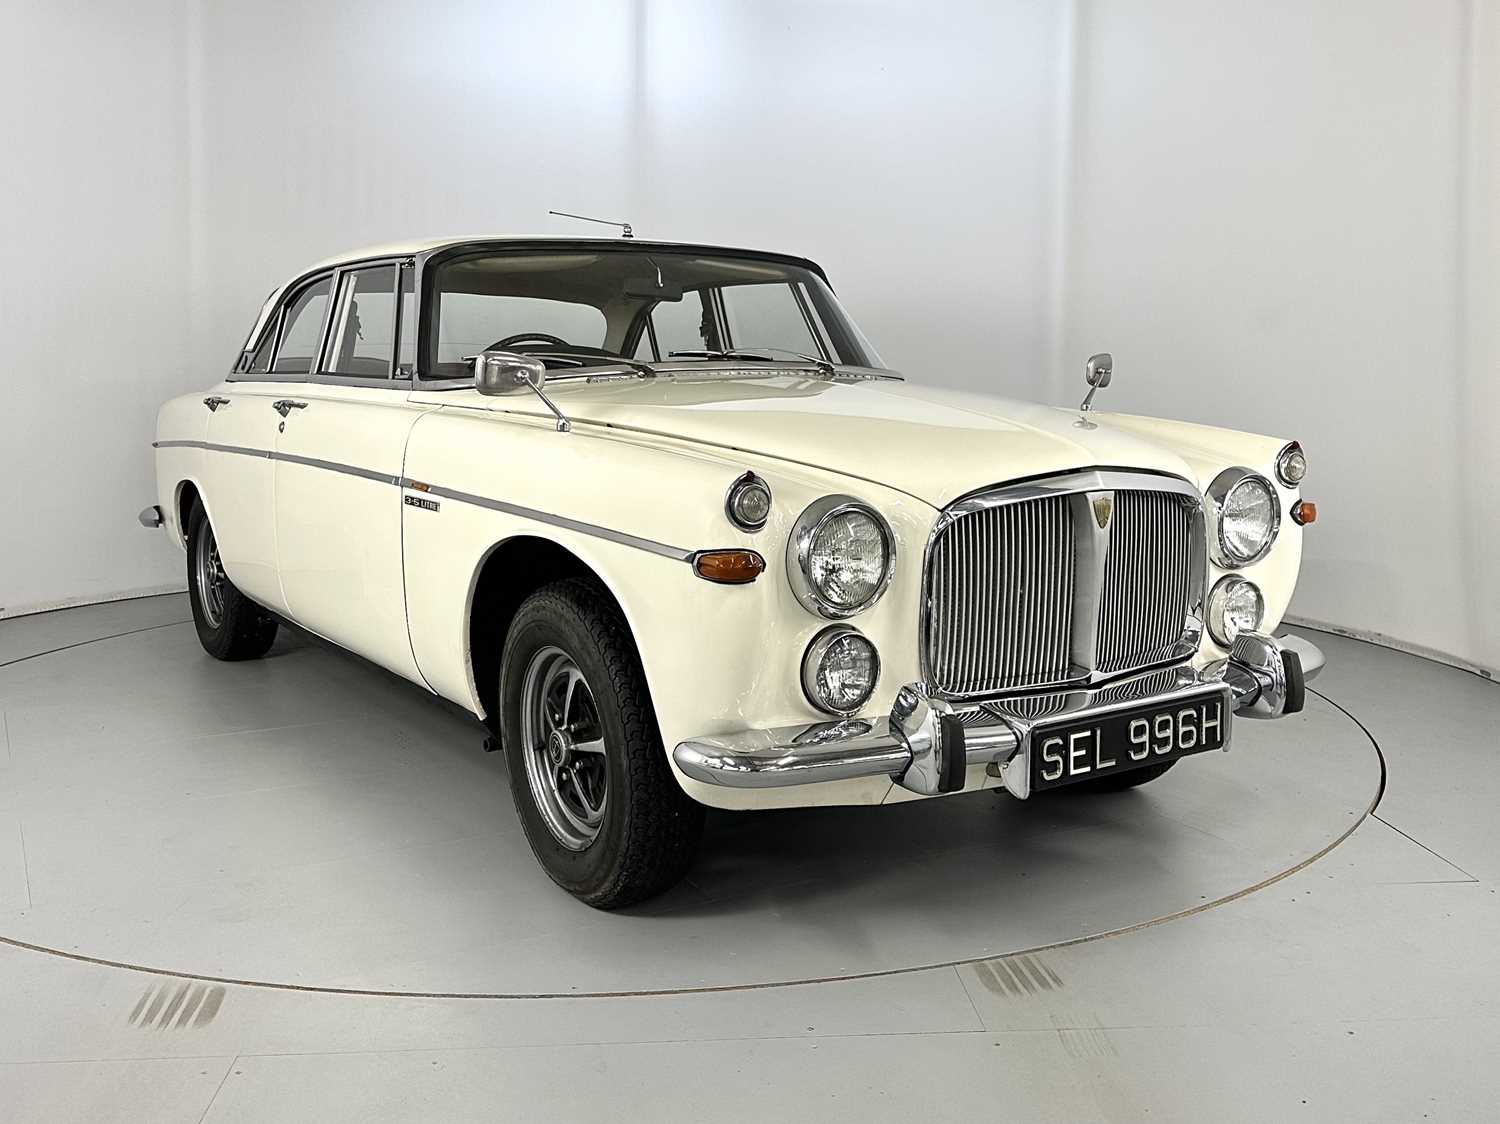 Lot 95 - 1970 Rover P5 B Coupe